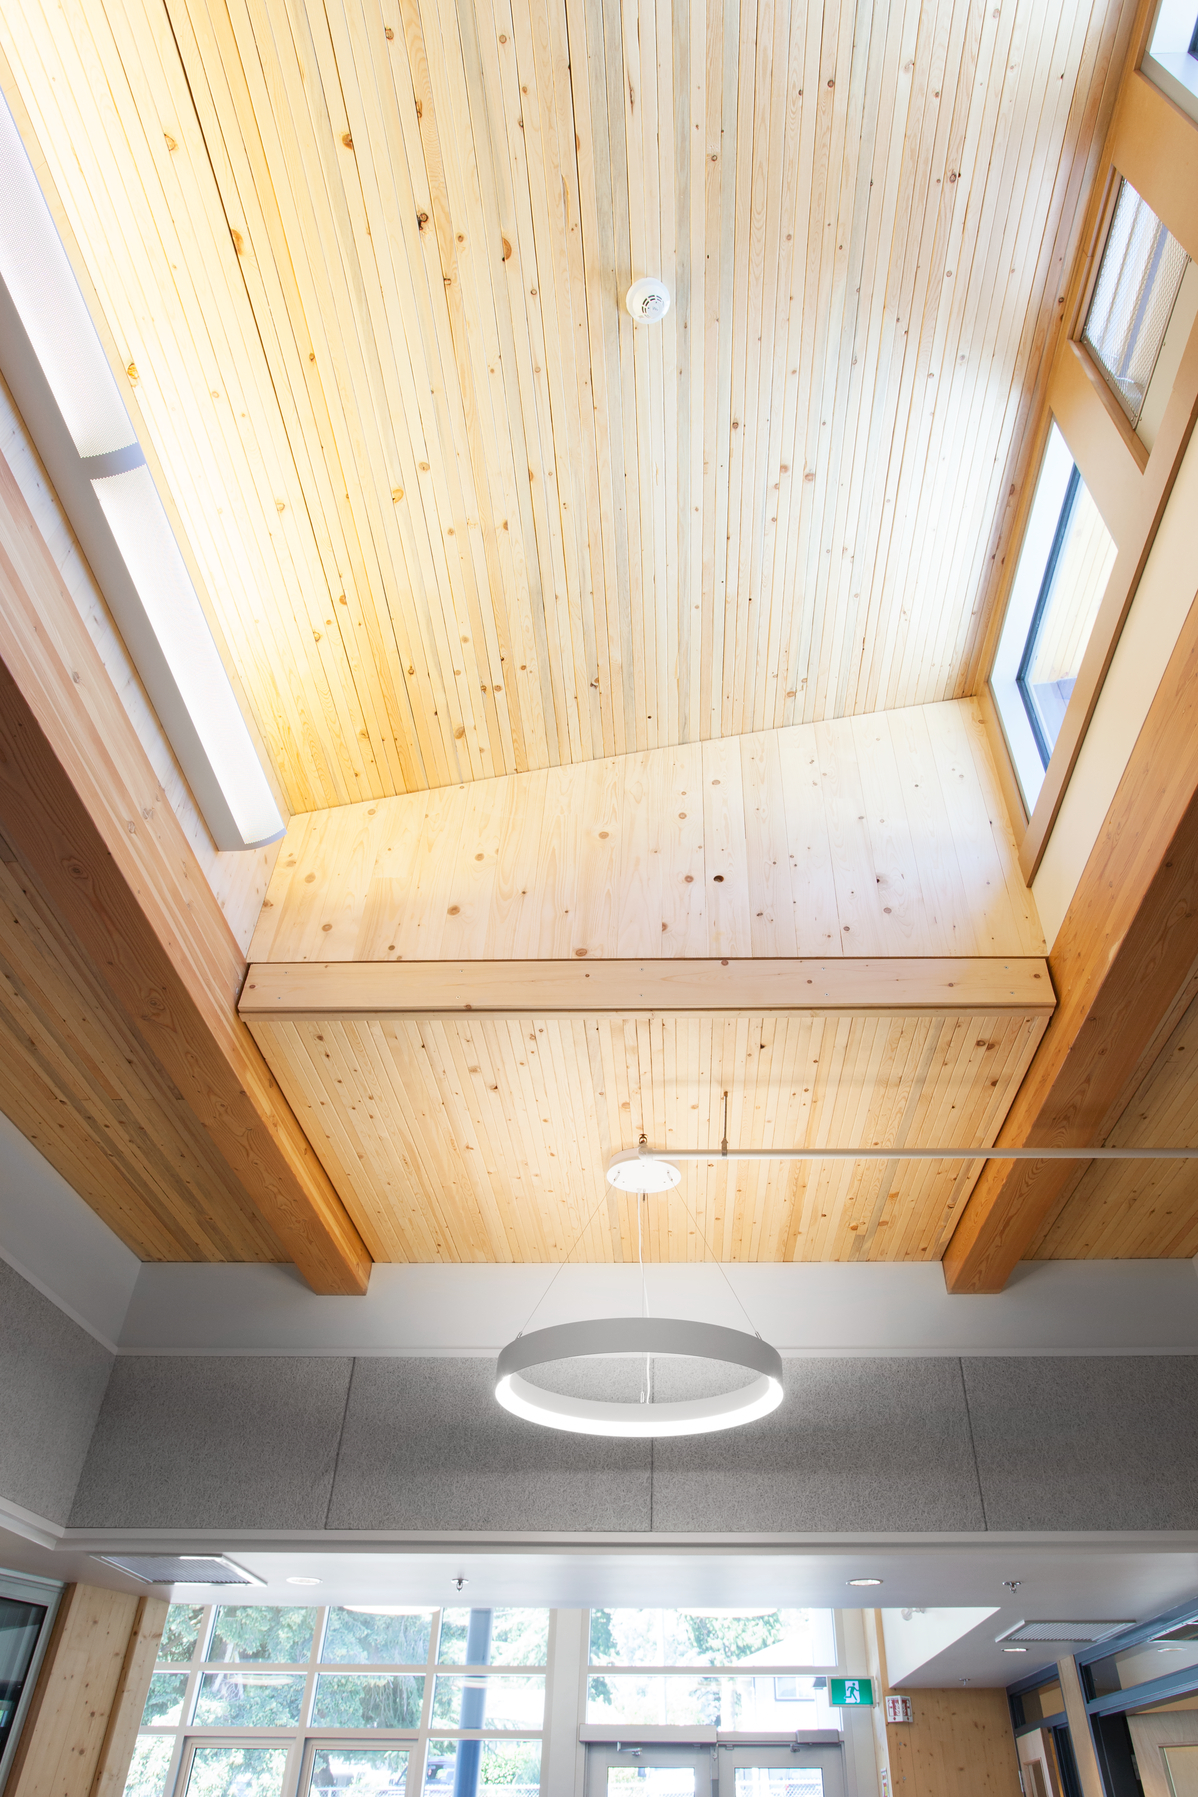 Interior daytime upward view of Cordova Bay Elementary School showing ceiling of prefabricated panelized wood building systems composed of nail-laminated timber (NLT) and cross-laminated timber (CLT)